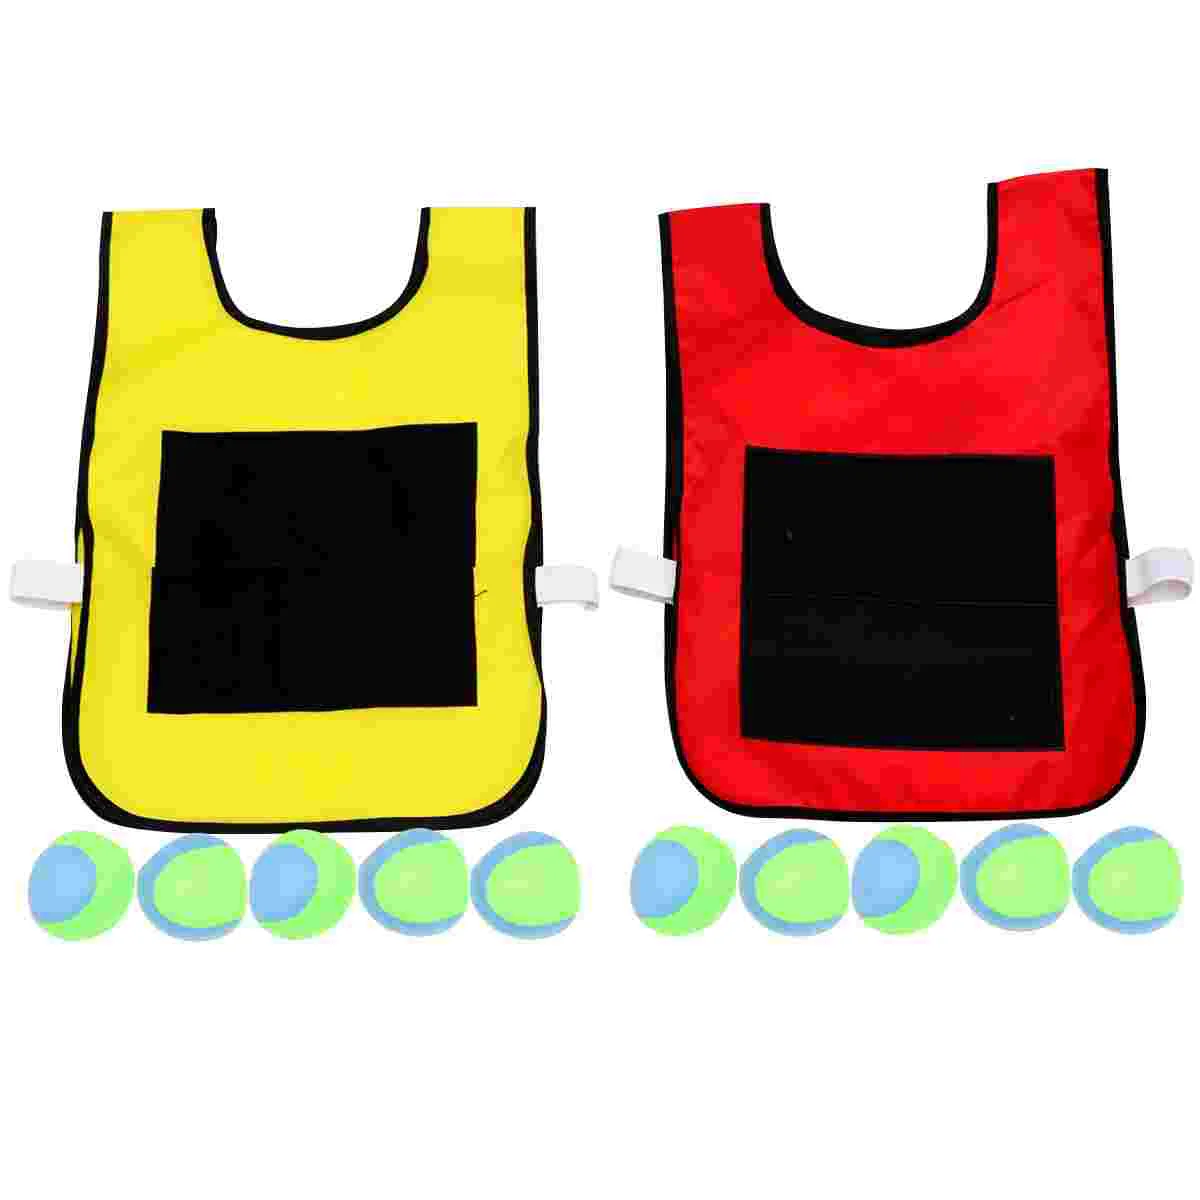 

1 Set Children Sticky Ball and Vest Game Props Sticky Ball Vest Group Plaything for Home School (Red, Yellow Vest and 10 Pcs